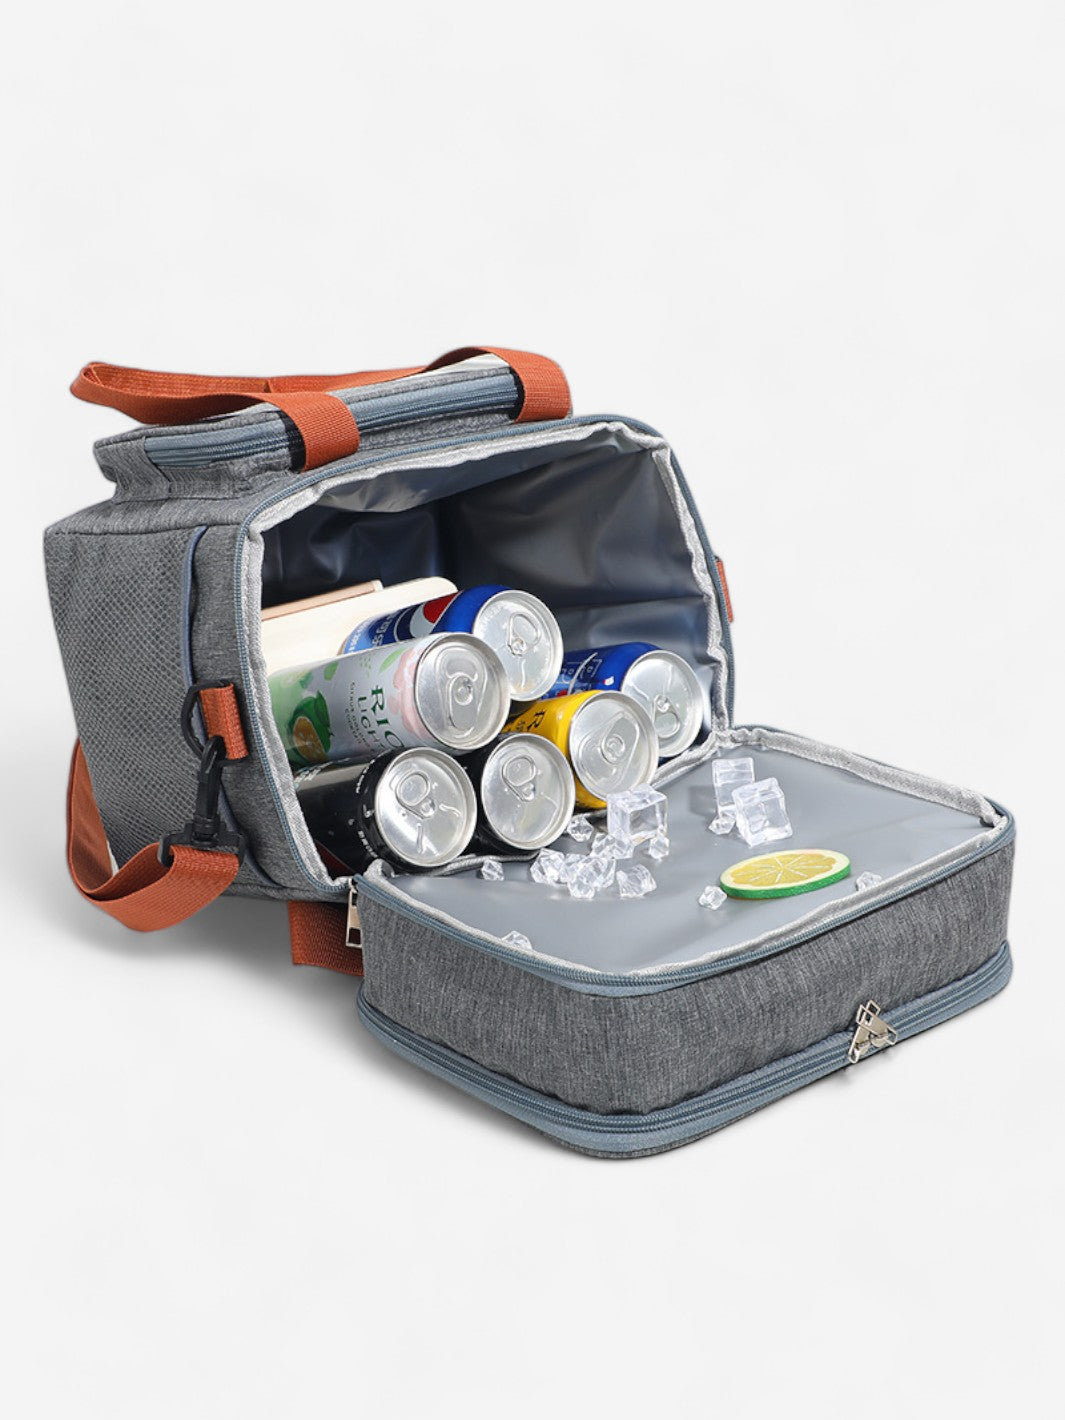 Sac Isotherme pour Lunch Box